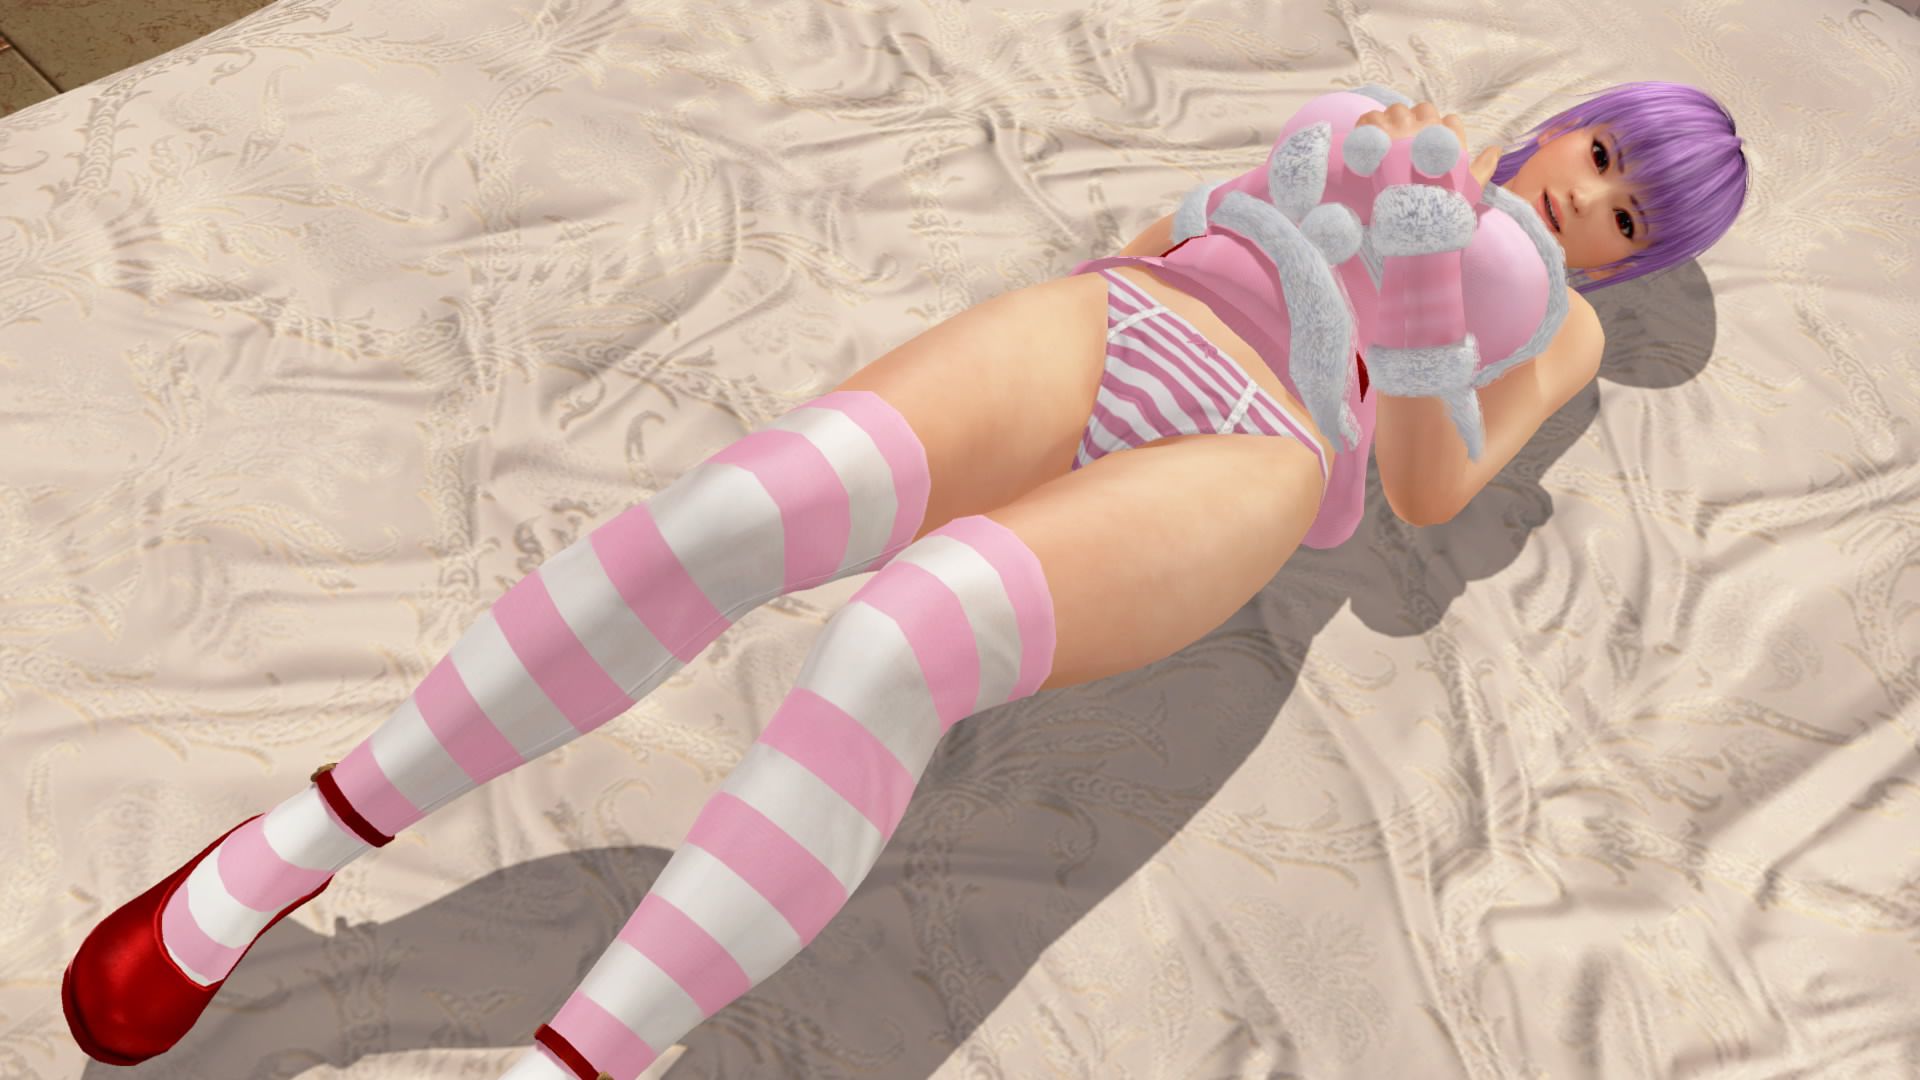 Doax3 "The color which suits the Aya-chan is pink" theory is verified 37